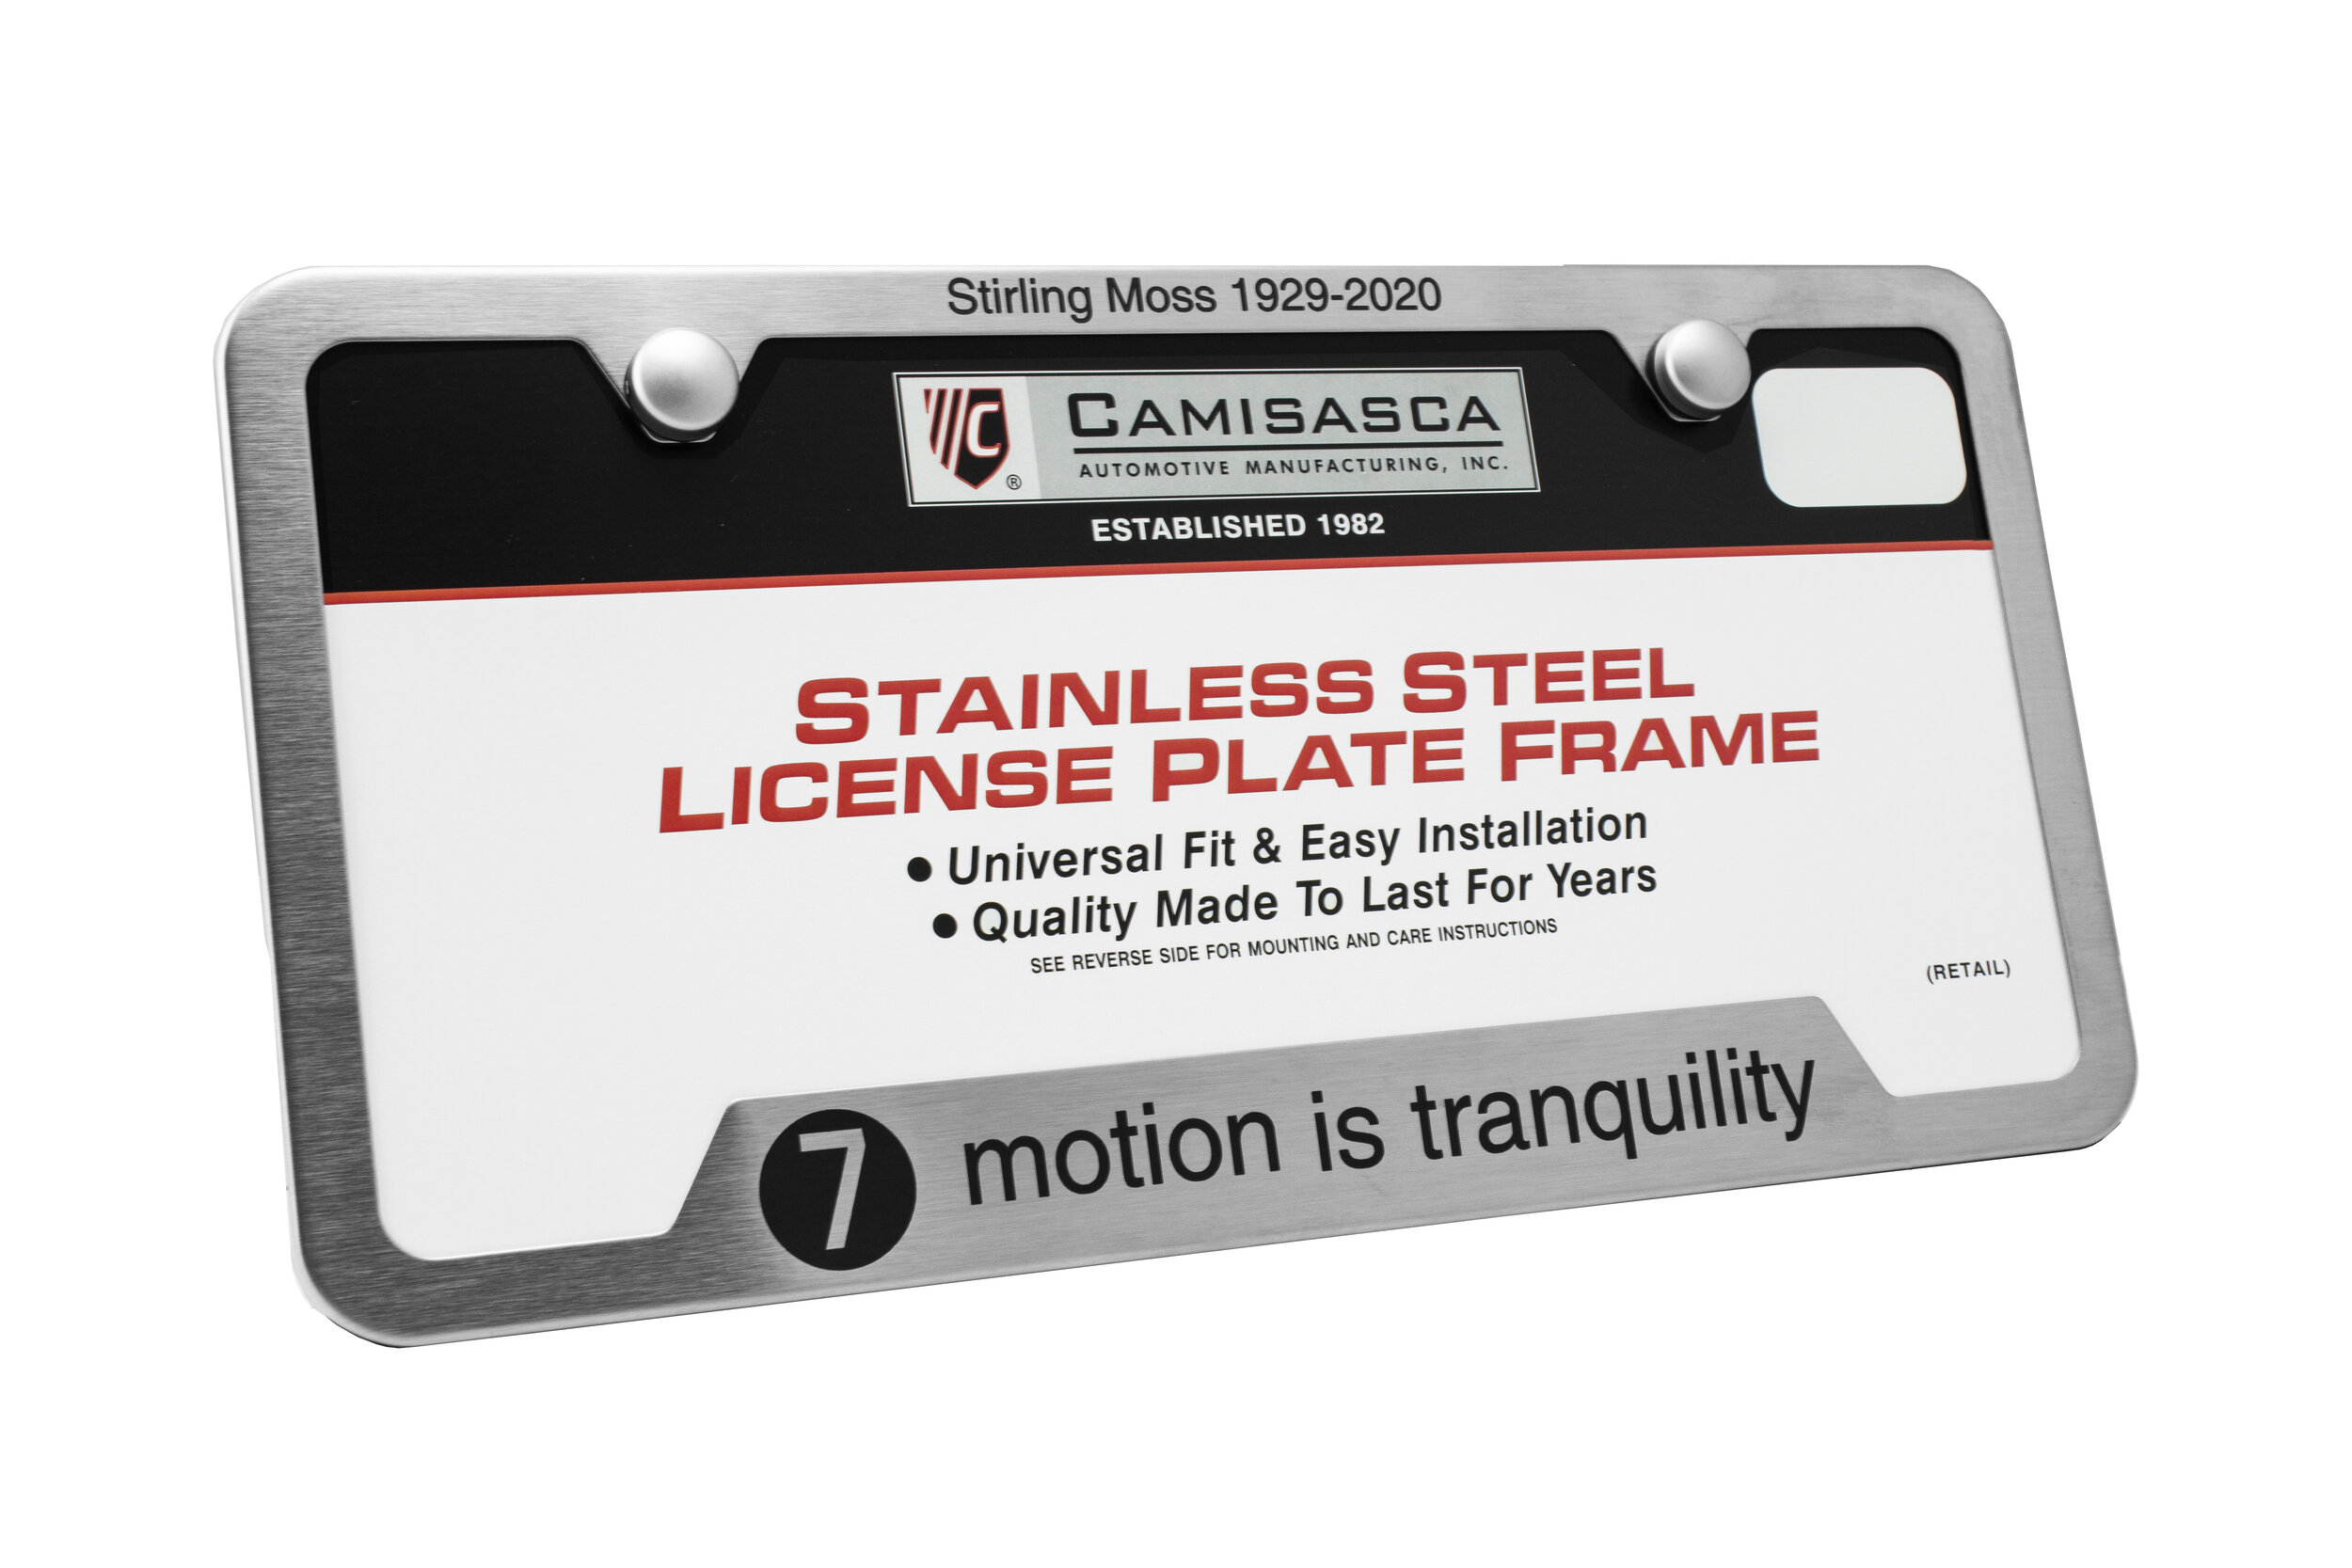 Camisasca Stirling Moss Commemorative Stainless Steel License Plate Frame